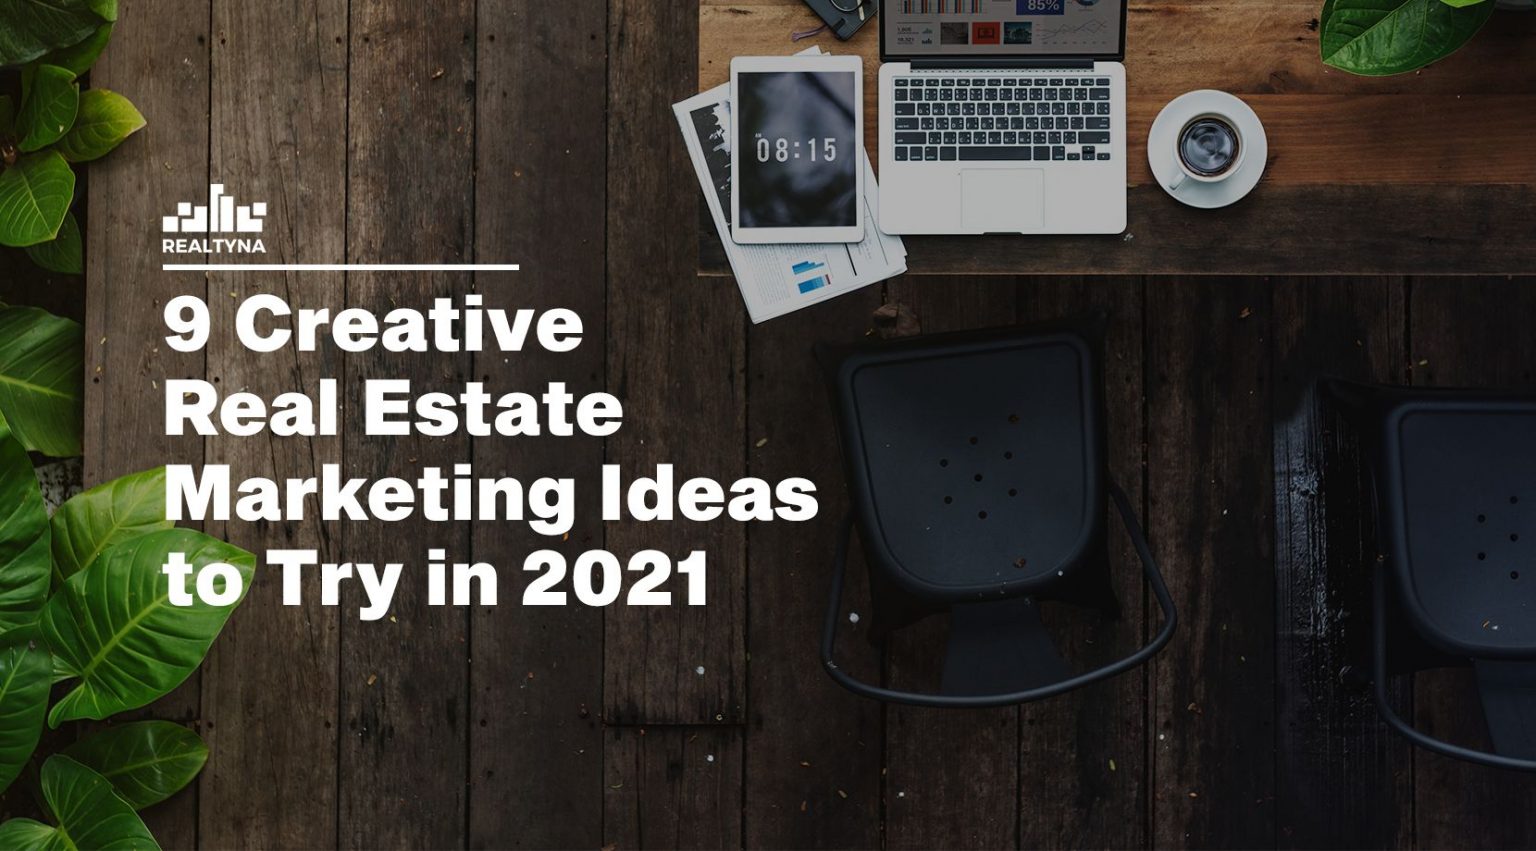 9 Creative Real Estate Marketing Ideas to Try in 2021